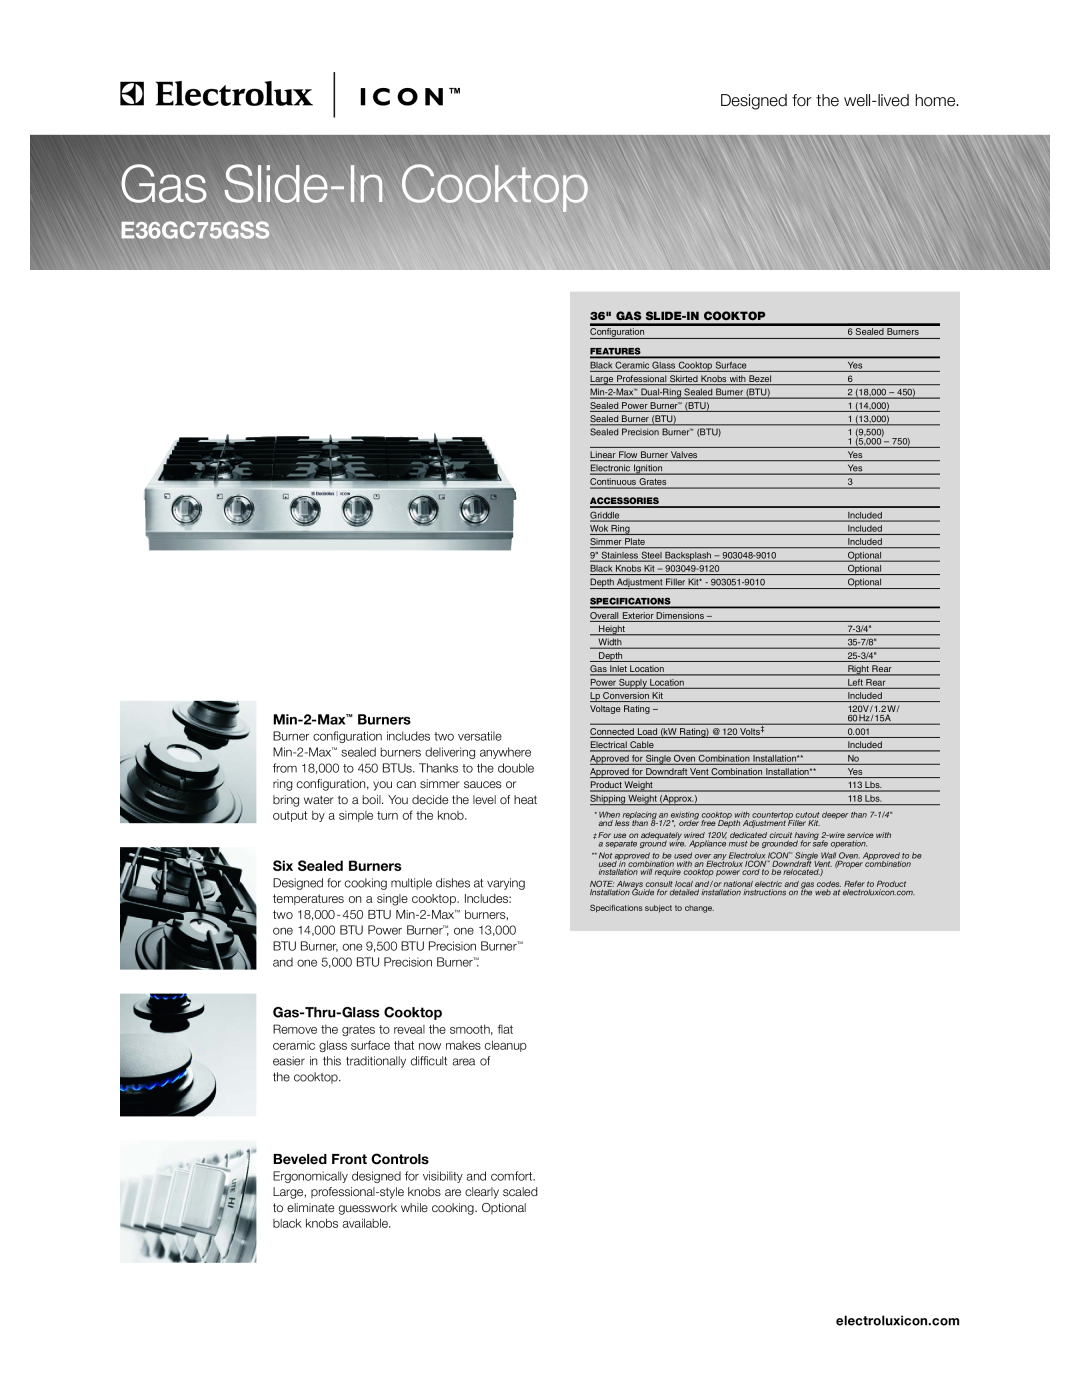 Electrolux E36GC75GSS specifications Gas Slide-In Cooktop, Designed for the well-lived home, the cooktop 